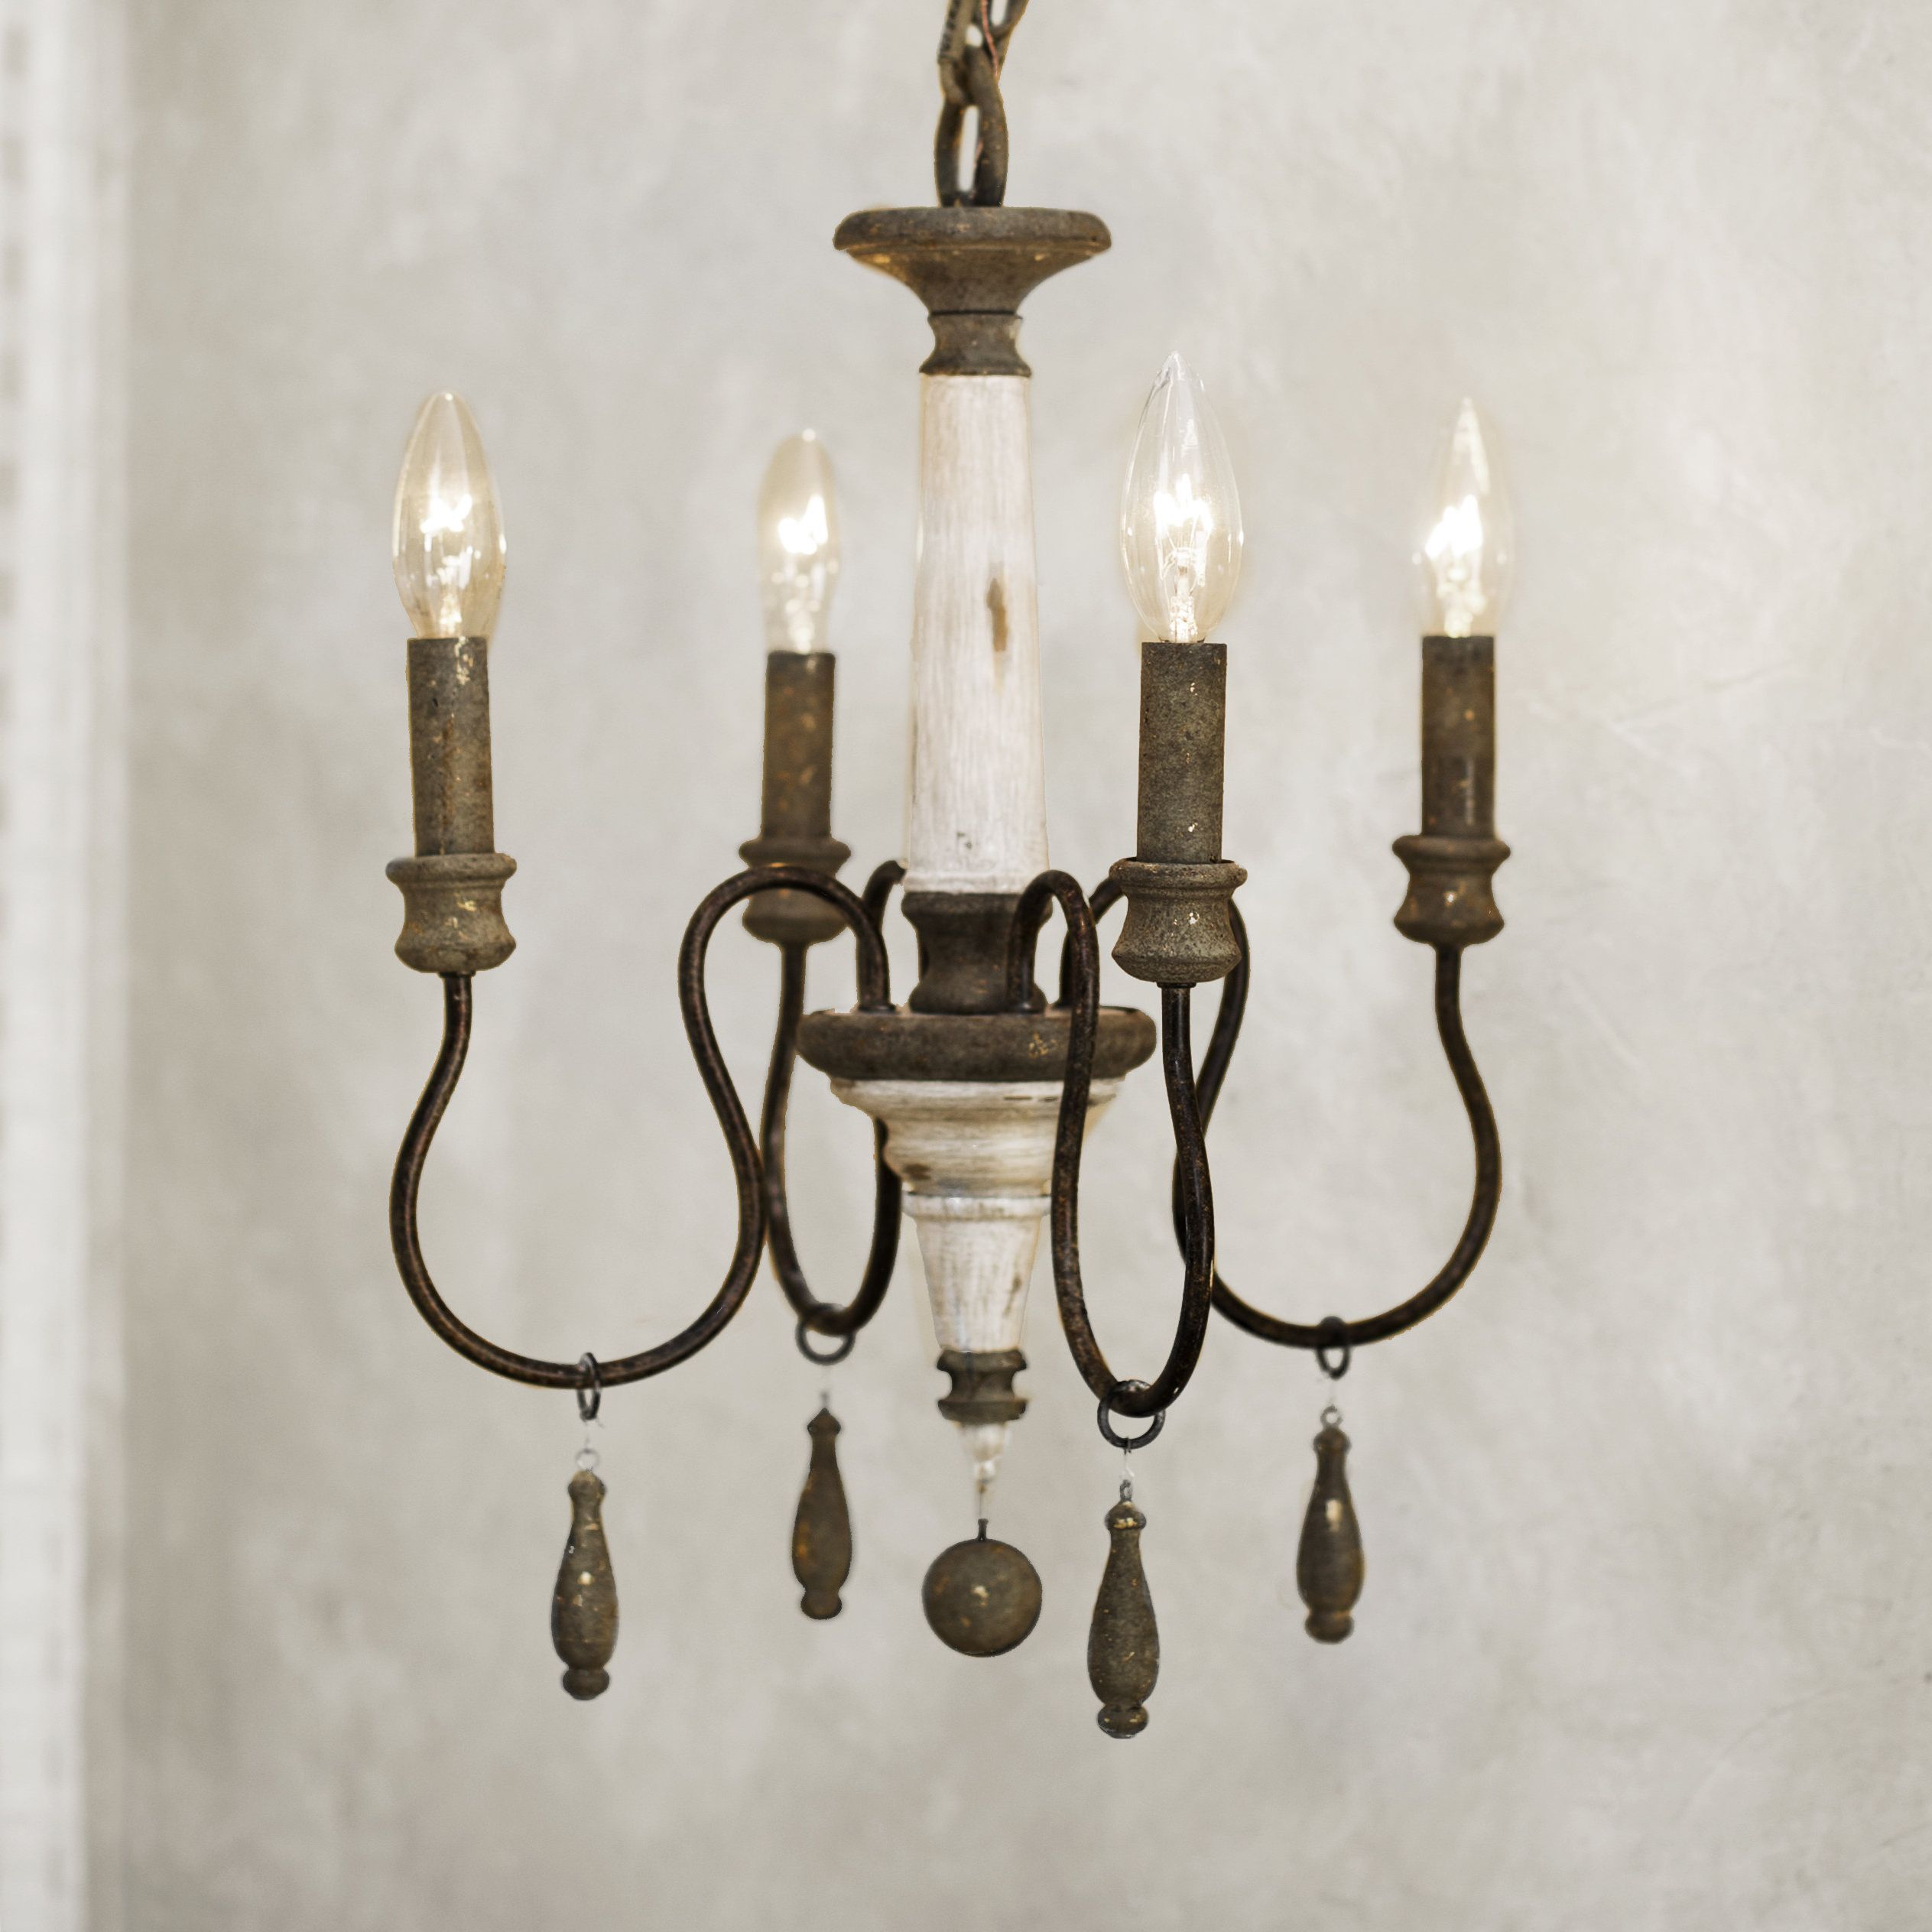 Armande Candle Style Chandelier Regarding Most Recently Released Armande Candle Style Chandeliers (View 1 of 25)